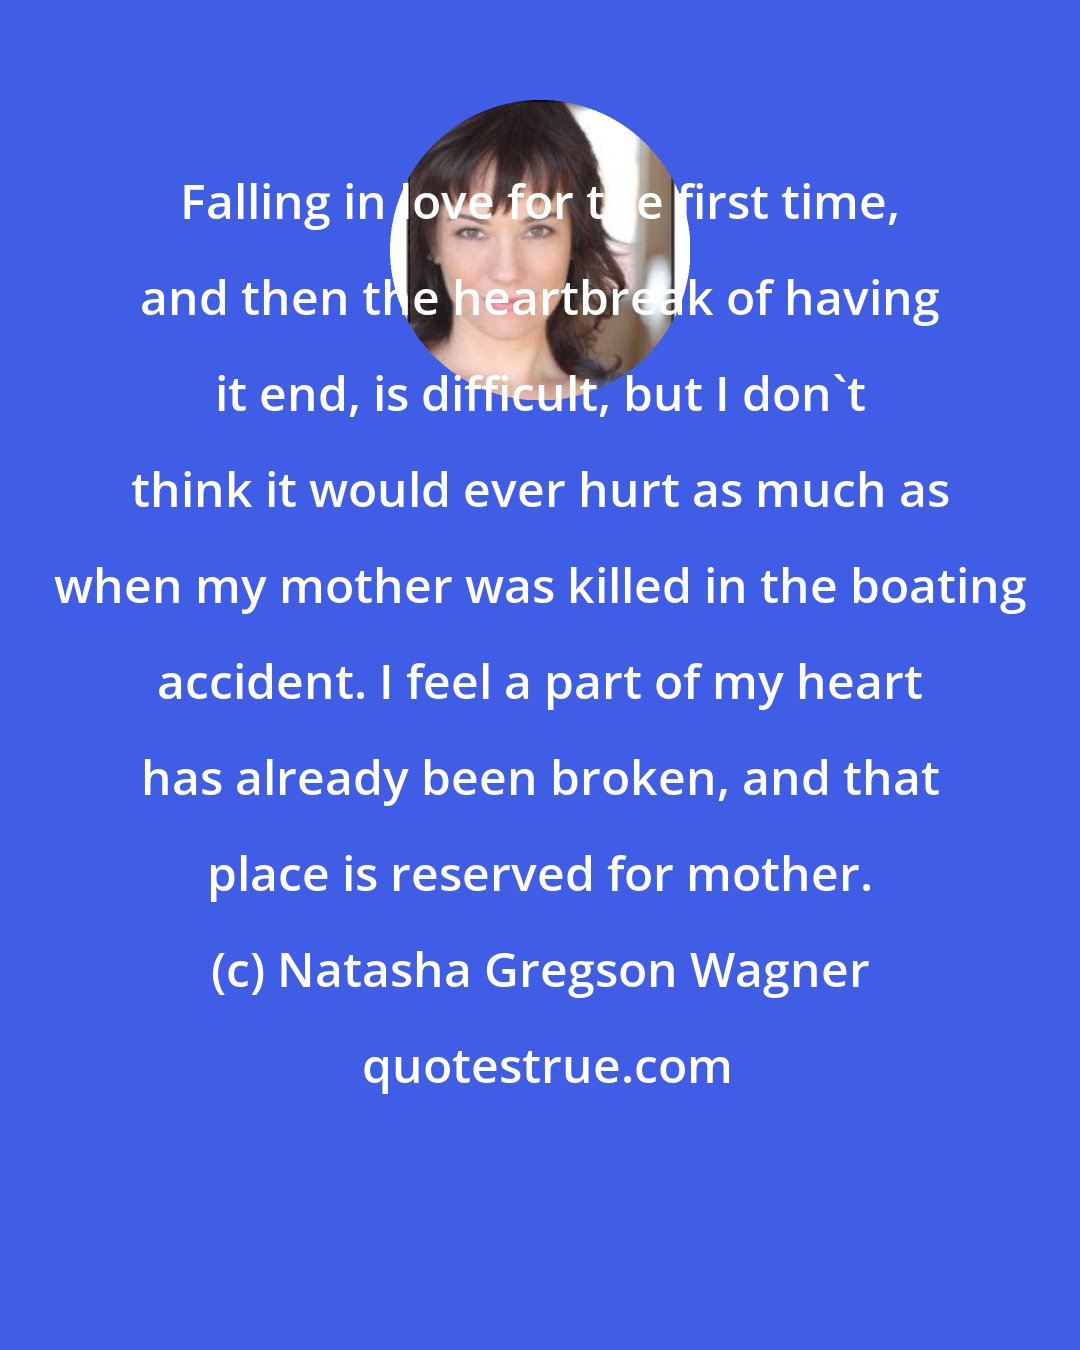 Natasha Gregson Wagner: Falling in love for the first time, and then the heartbreak of having it end, is difficult, but I don't think it would ever hurt as much as when my mother was killed in the boating accident. I feel a part of my heart has already been broken, and that place is reserved for mother.